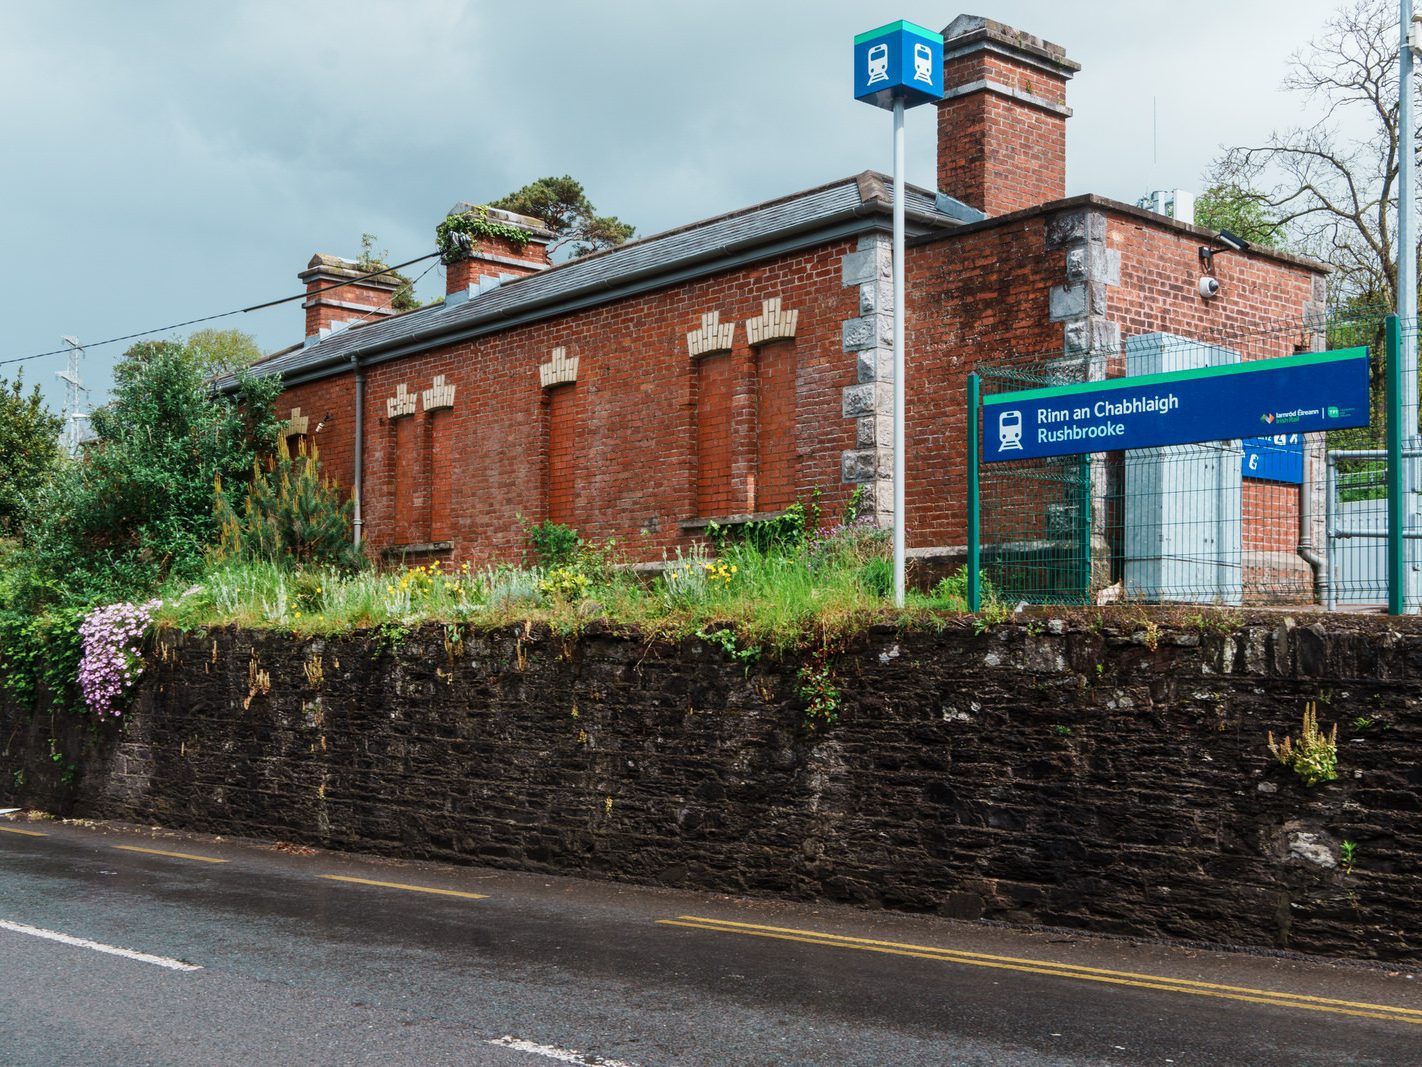 RAILWAY STATION AT RUSHBROOKE IN CORK [CORK TO COBH LINE] 017